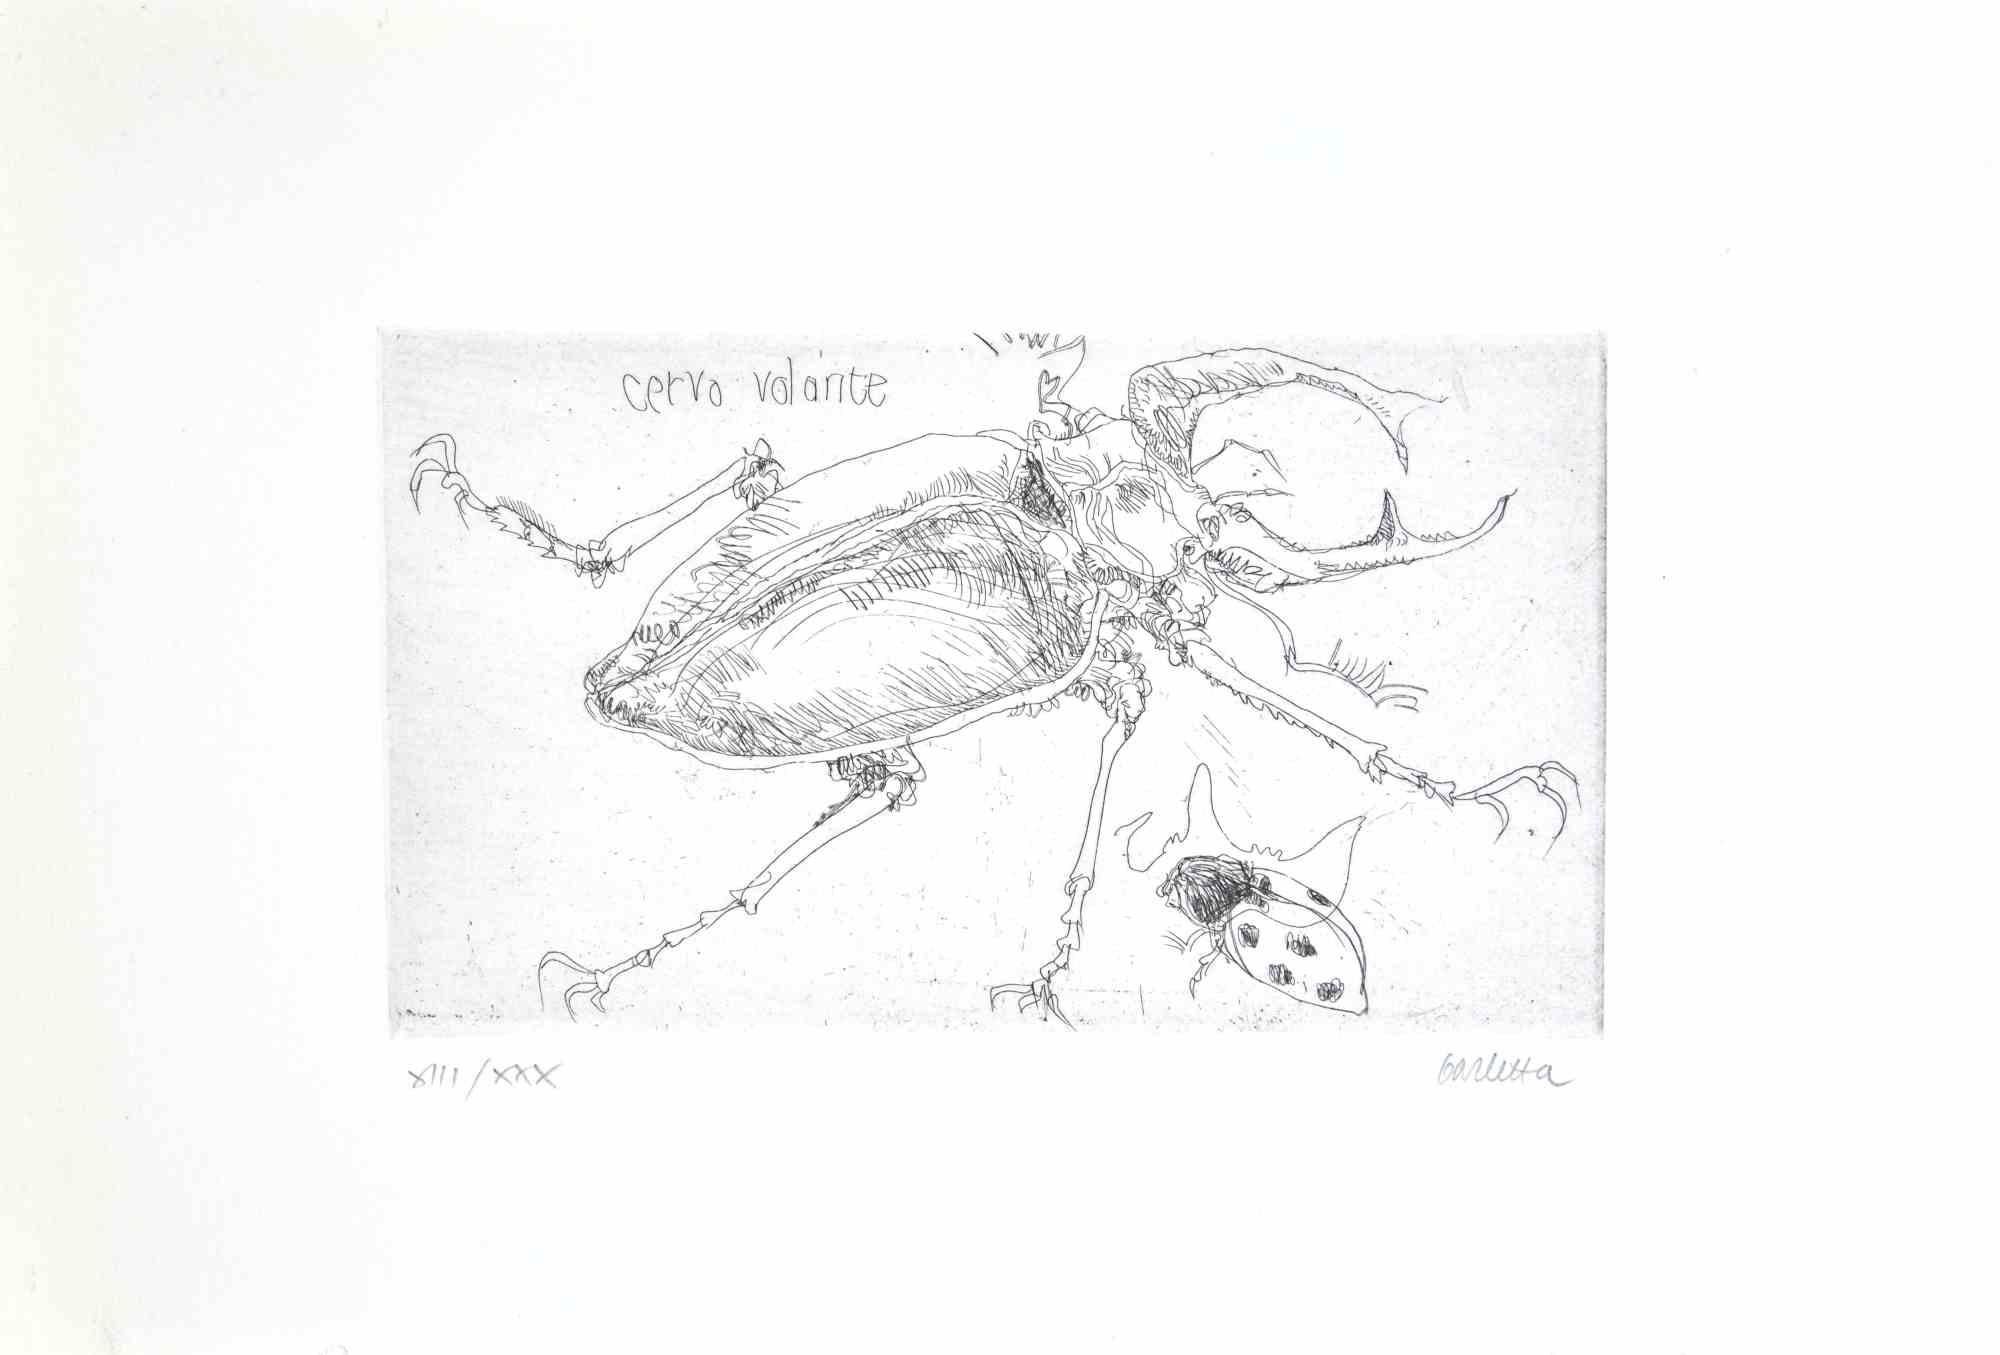 Insect  is an etching realized by  Sergio Barletta in 1974.

Hand-signed in pencil on the lower right. Numbered on the lower left in Roman numerals, from the edition of XXX prints.

Titled in Italian at the top left  "Cervo Volante".

Edition